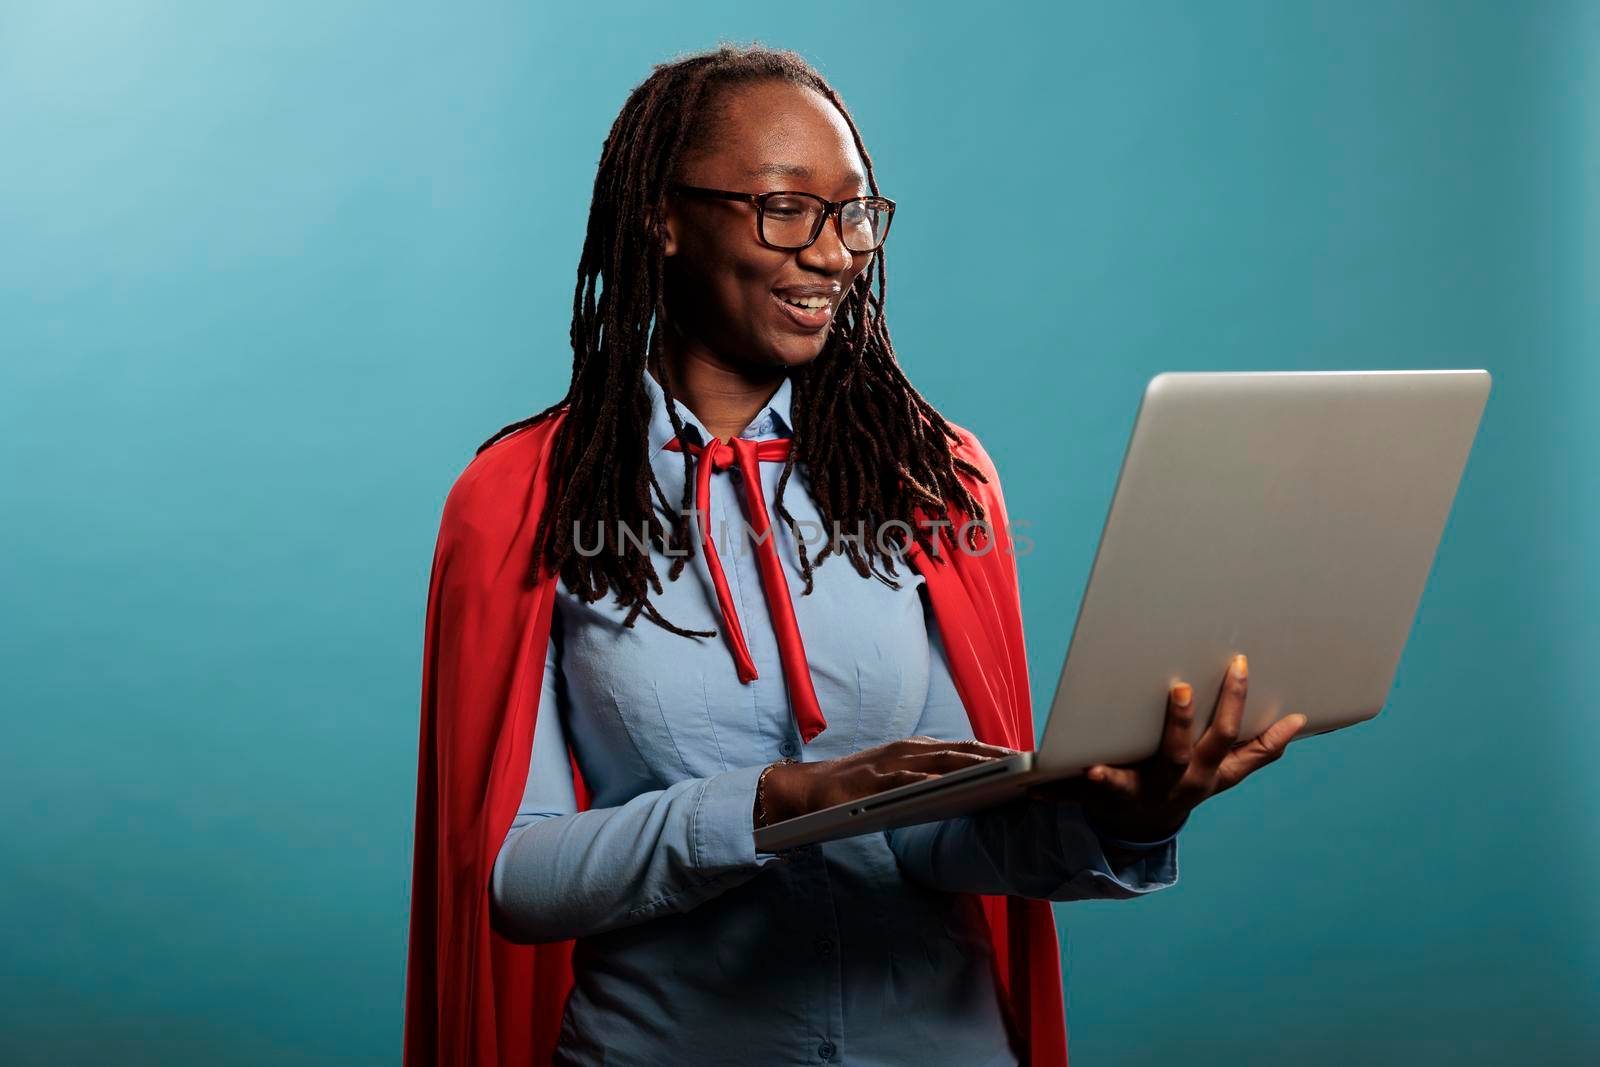 Confident and joyful justice defender wearing mighty hero cape while having handheld computer. Brave and proud young adult superhero woman using modern laptop while standing on blue background.